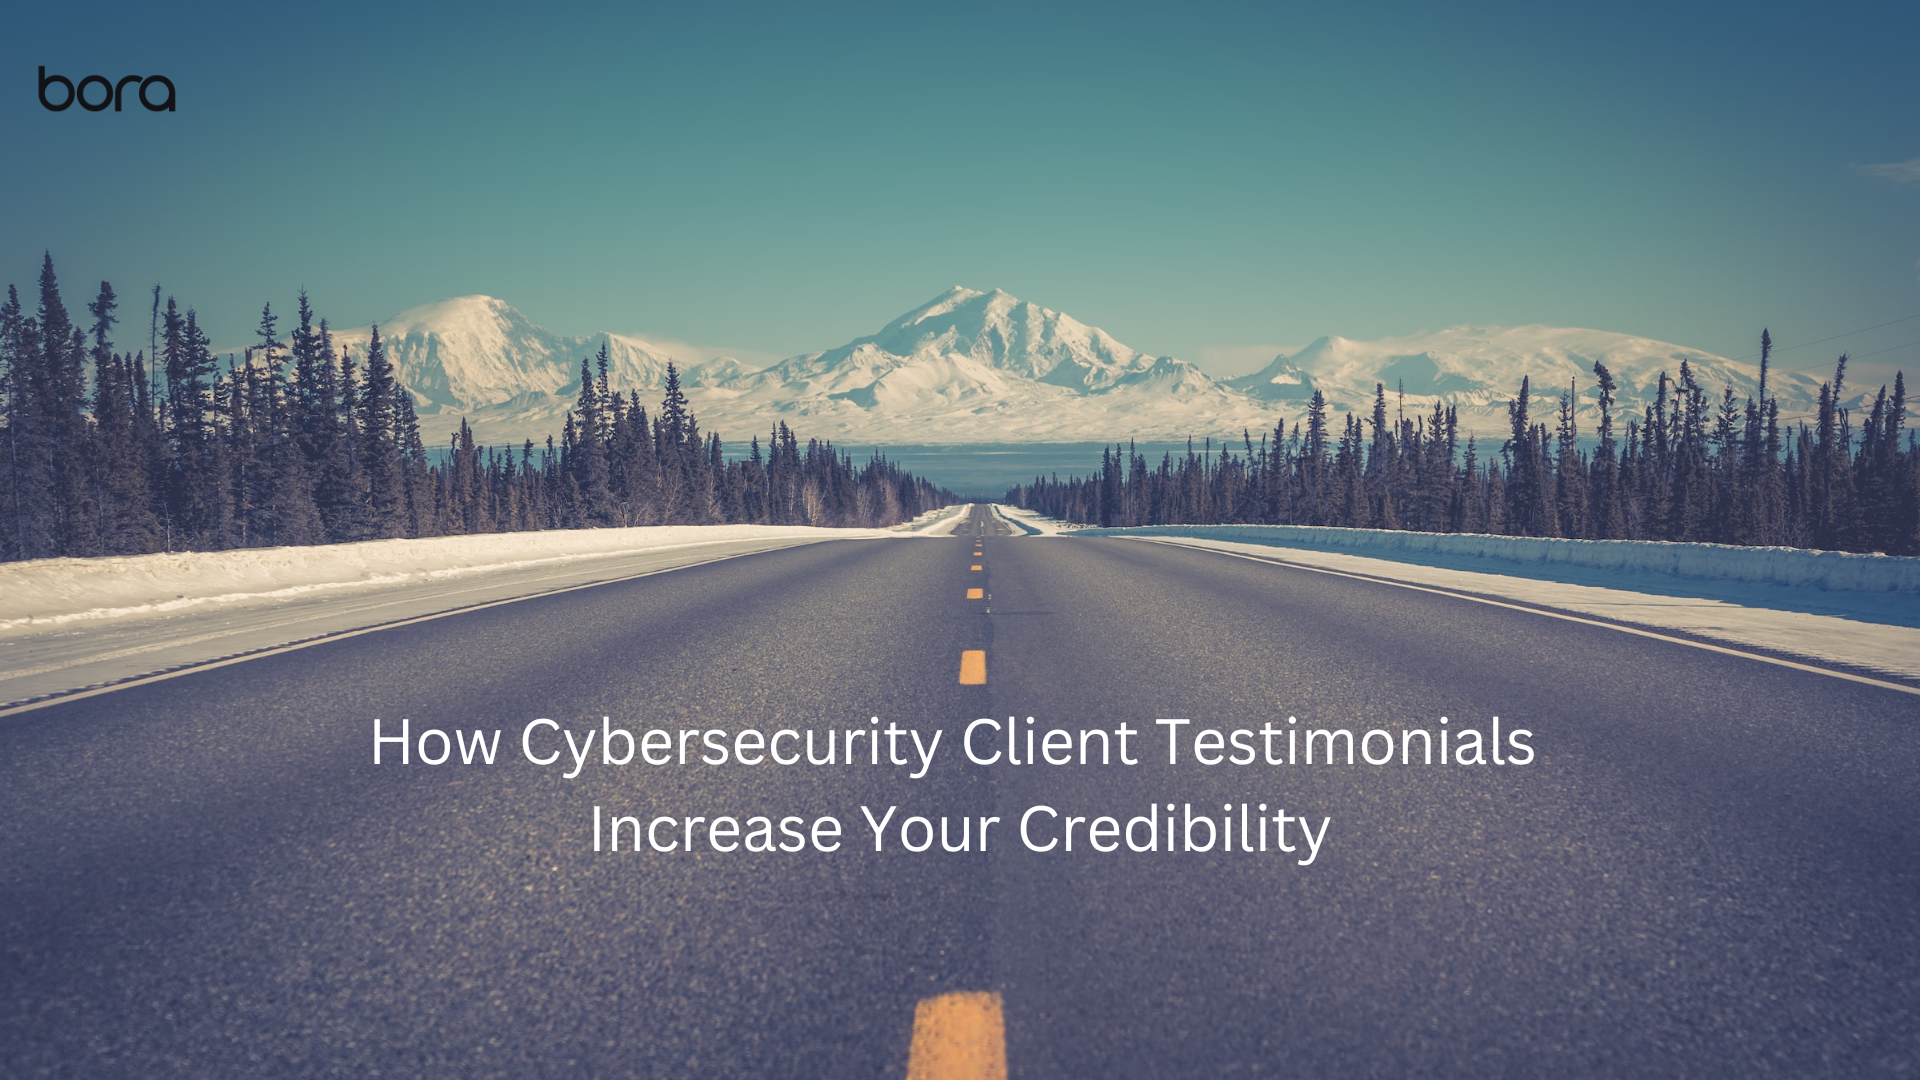 How Cybersecurity Client Testimonials Increase Your Credibility